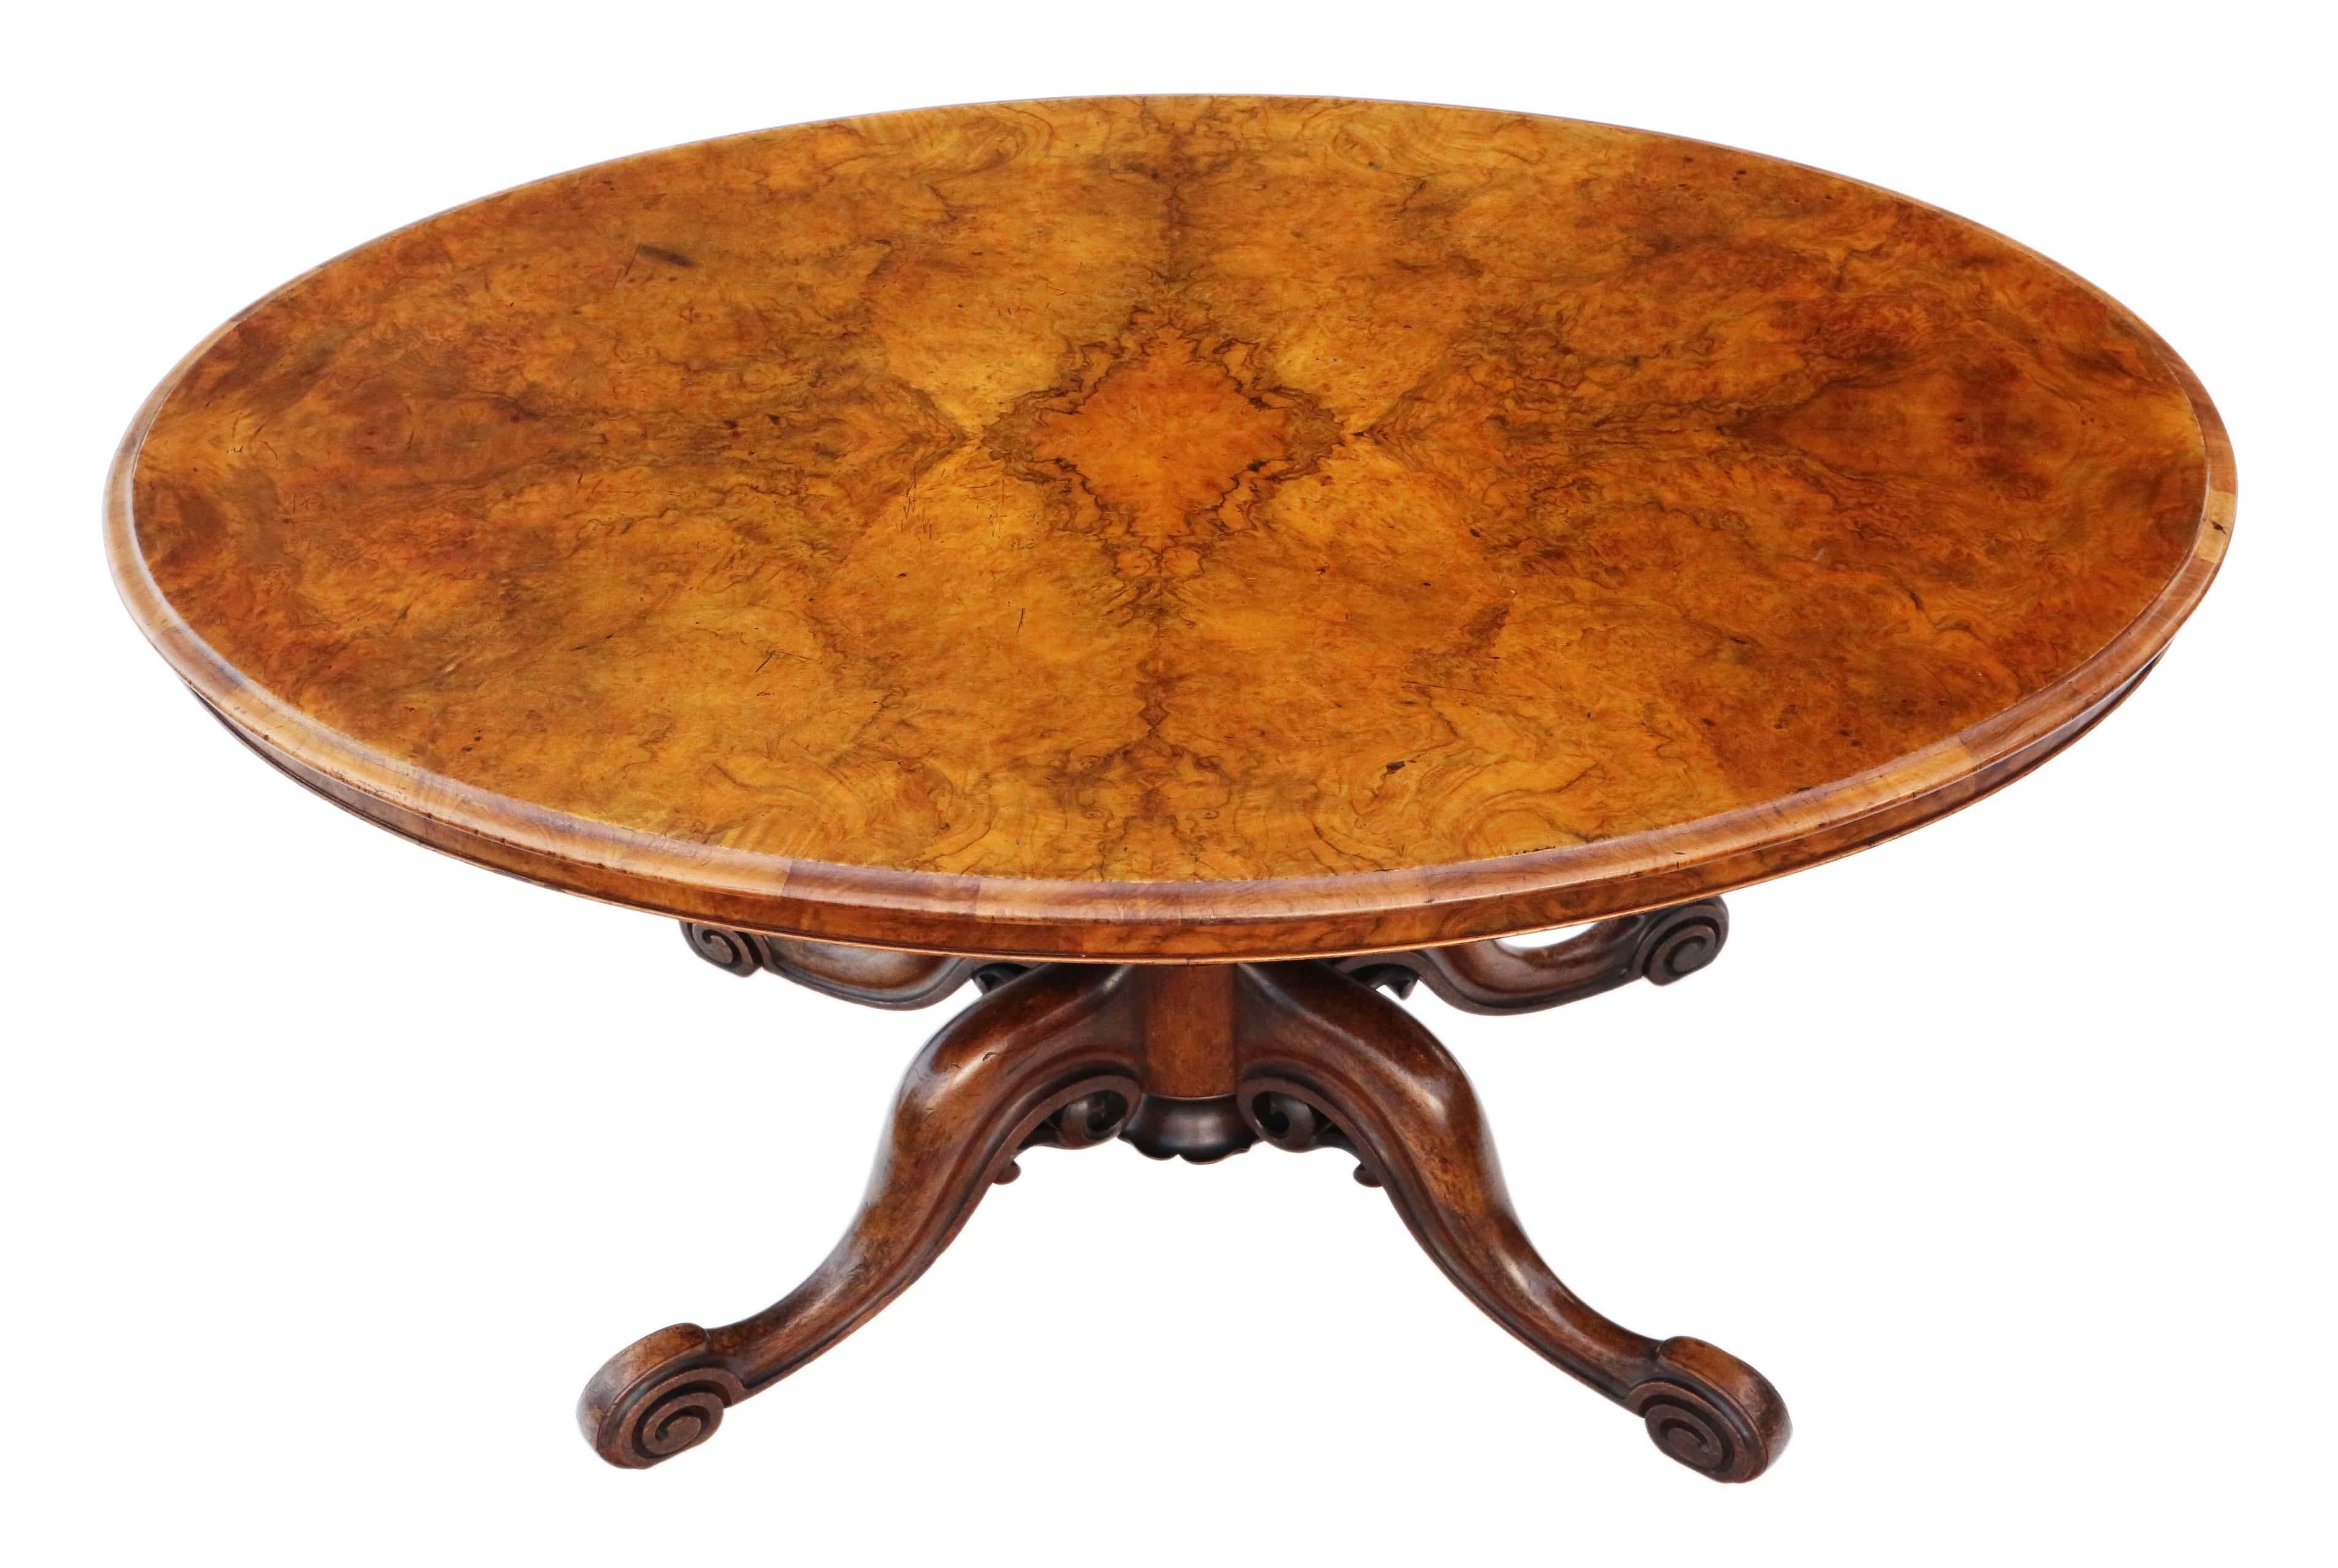 Victorian burr walnut oval loo breakfast table.
This is a lovely table (far far better than most), that is full of age, charm and character.
Rare and attractive. Tables of this quality do not come up often.
The table is heavy, solid and has no loose